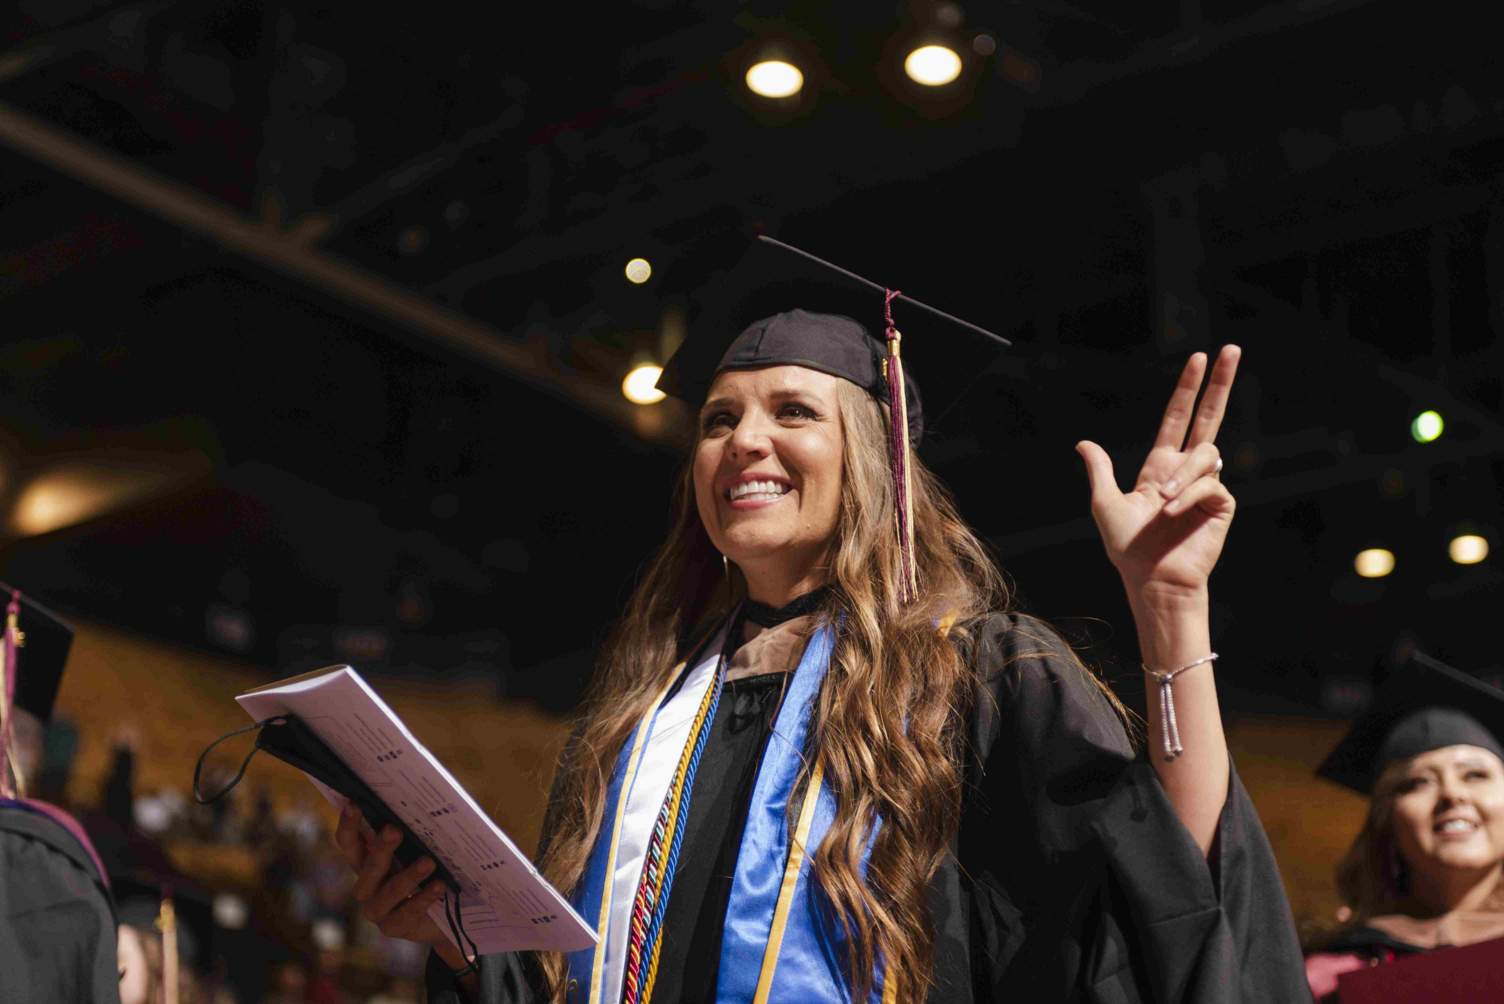 a student holds up the Texas State hand sign during a commencement ceremony